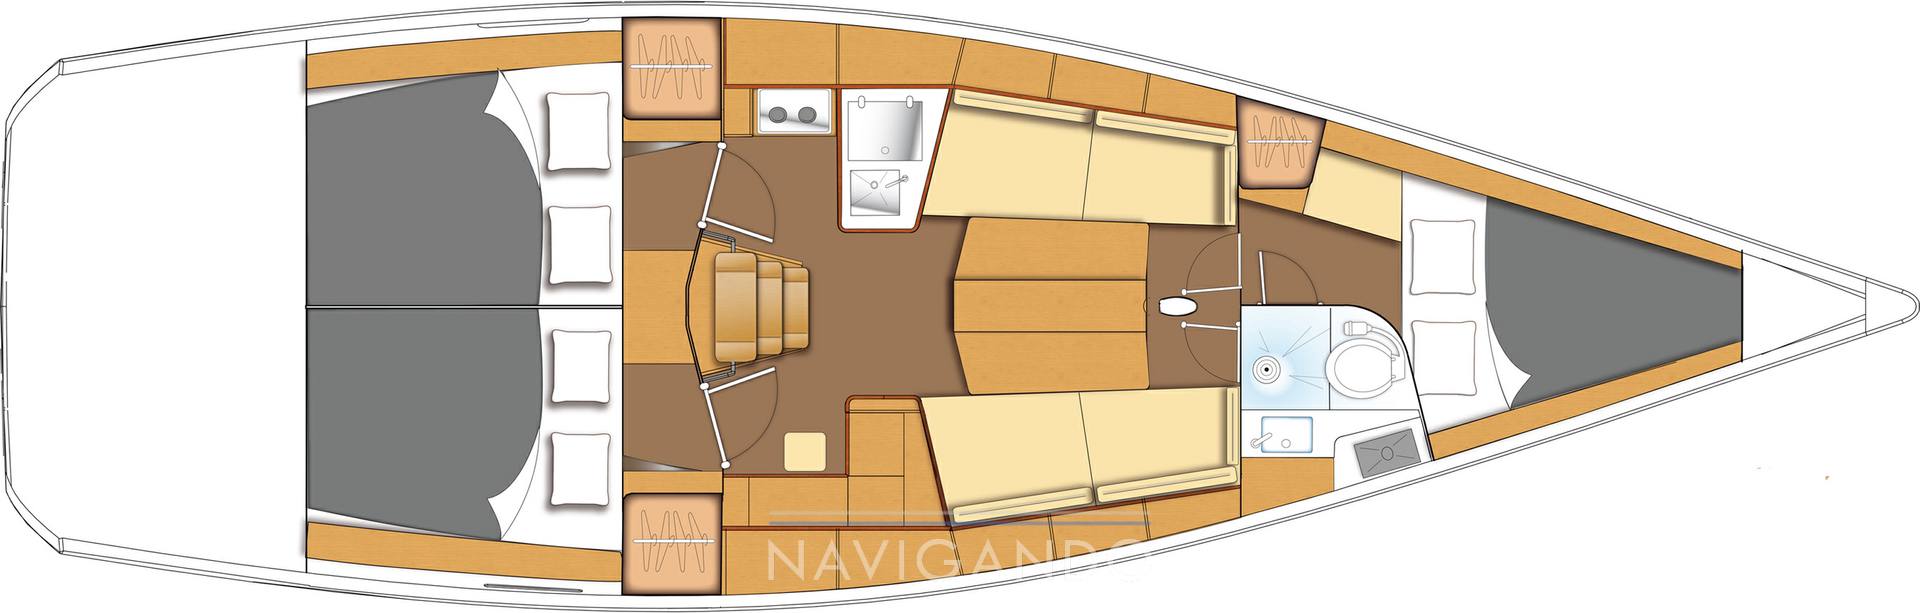 Beneteau First 40 Disegno